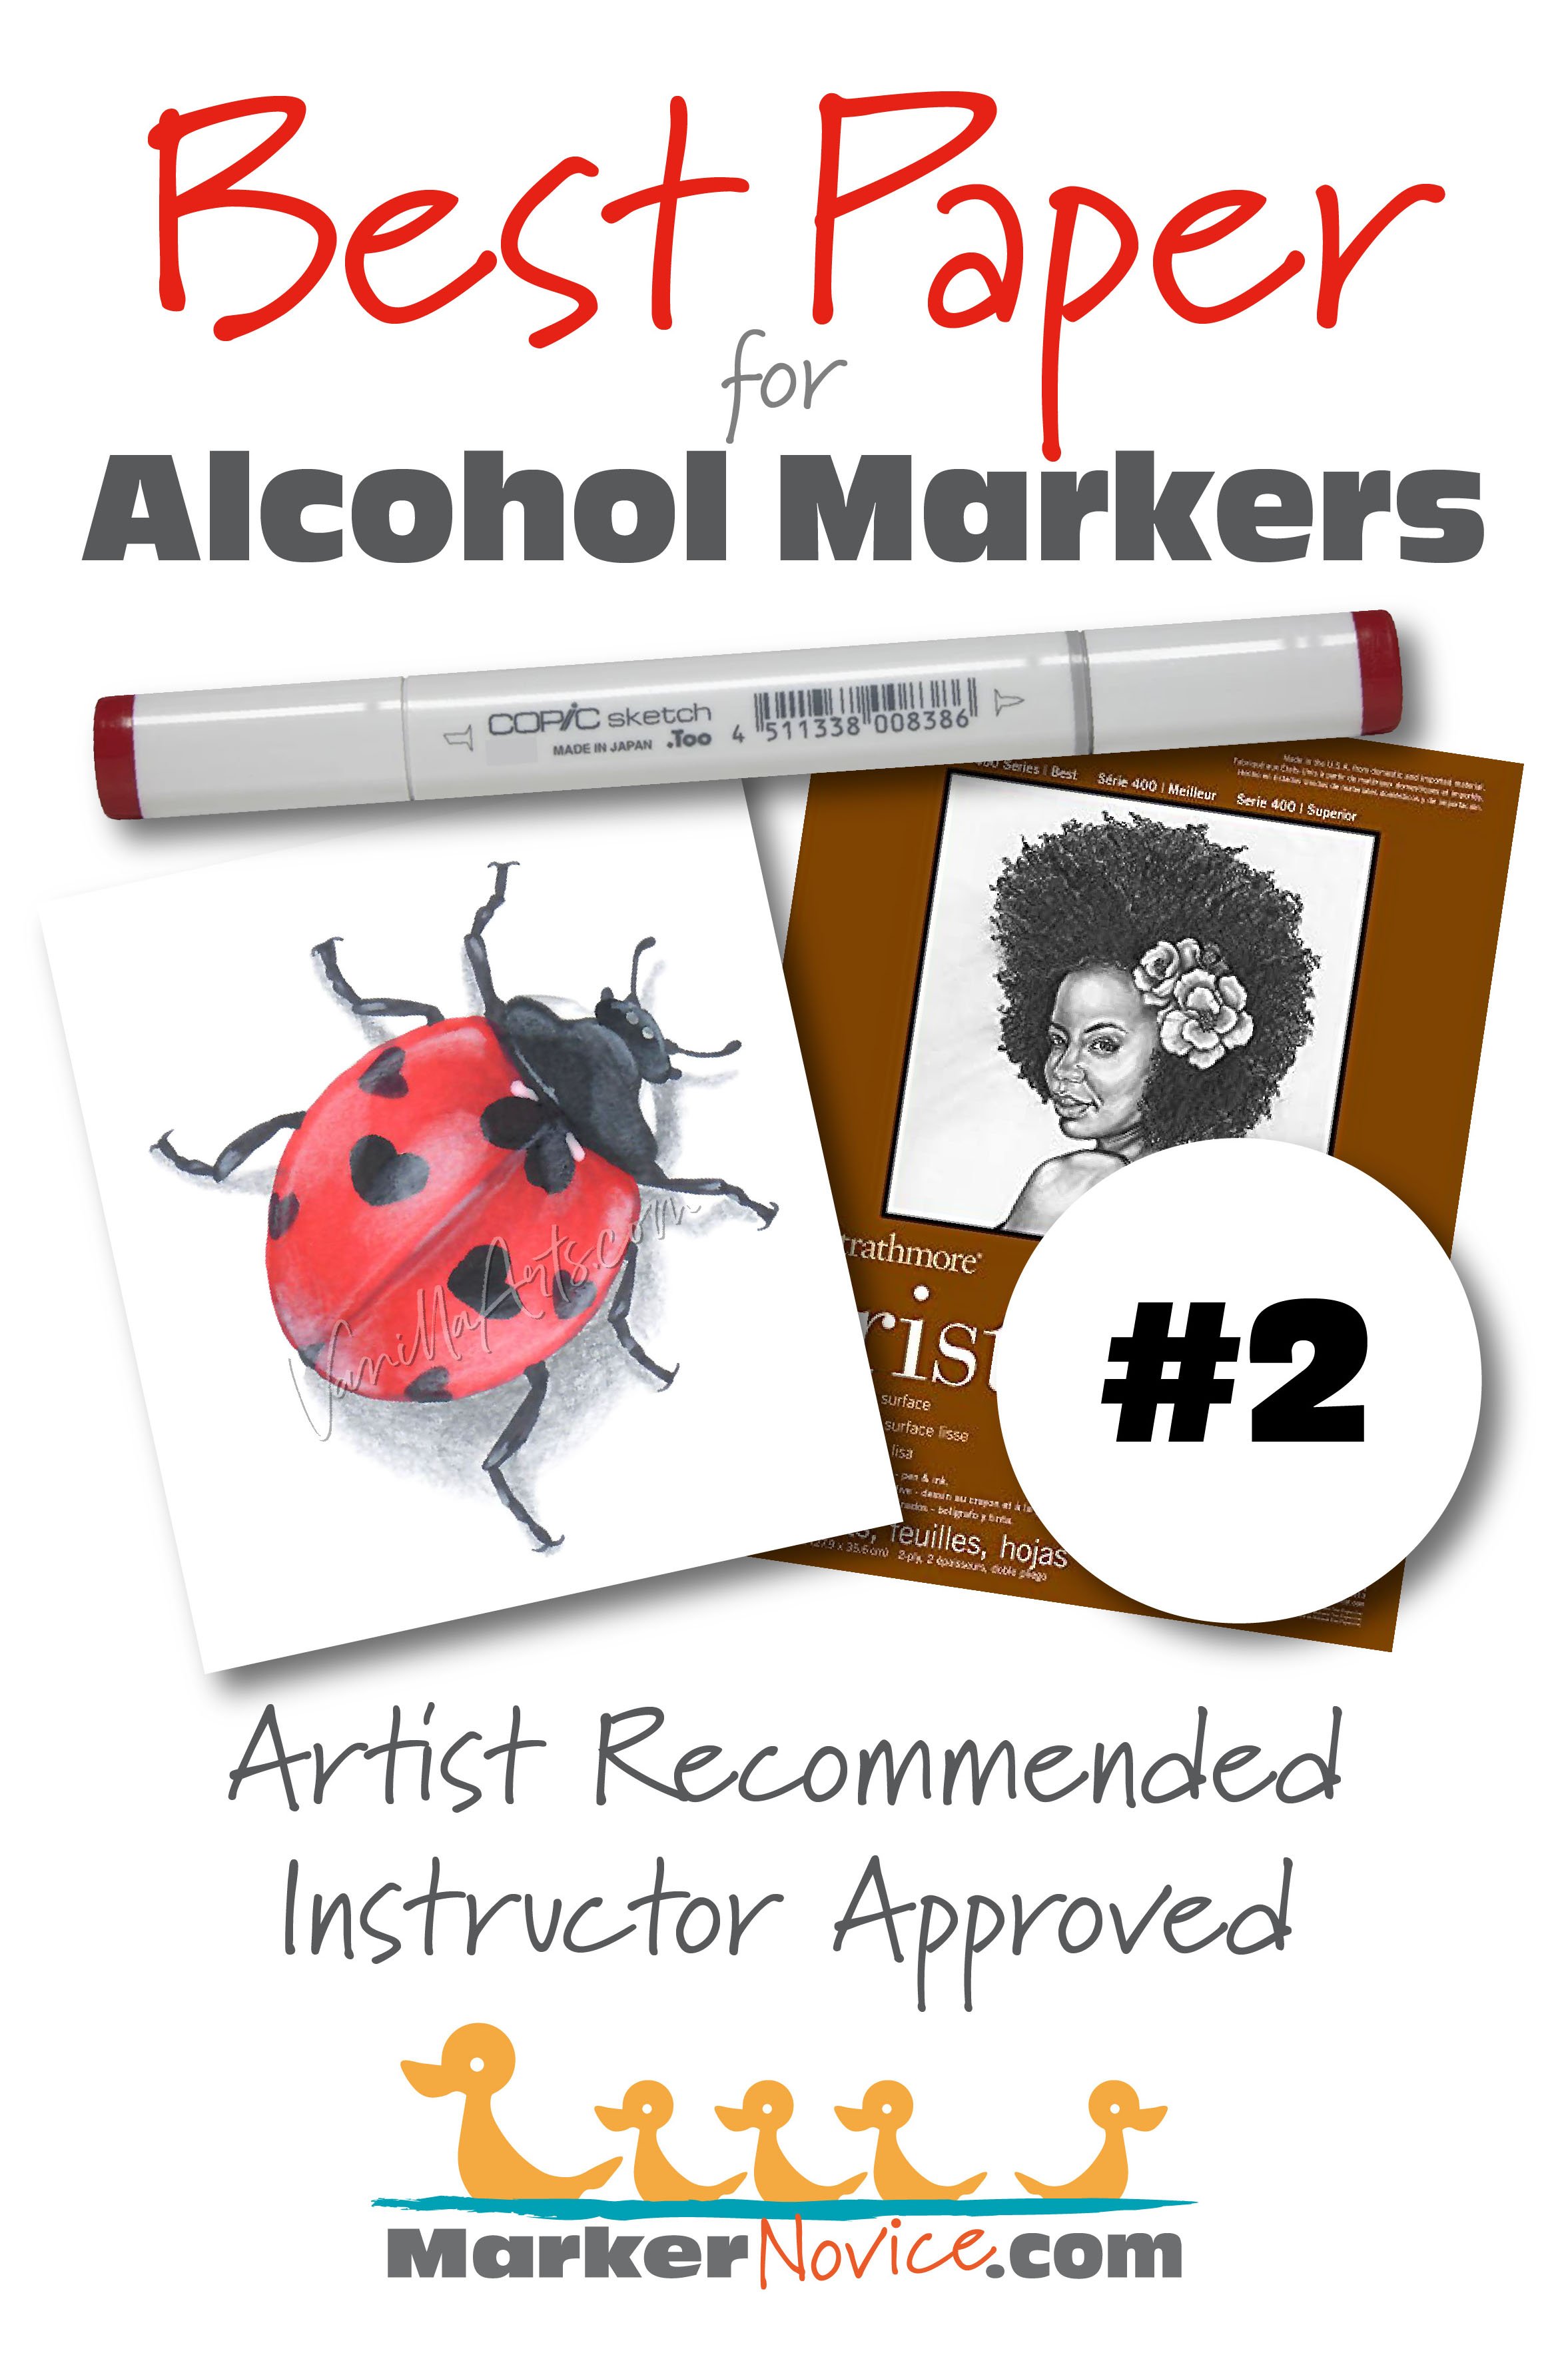 Bond Paper Vs Others: Need Special Paper For Alcohol Markers? - Supply DIY